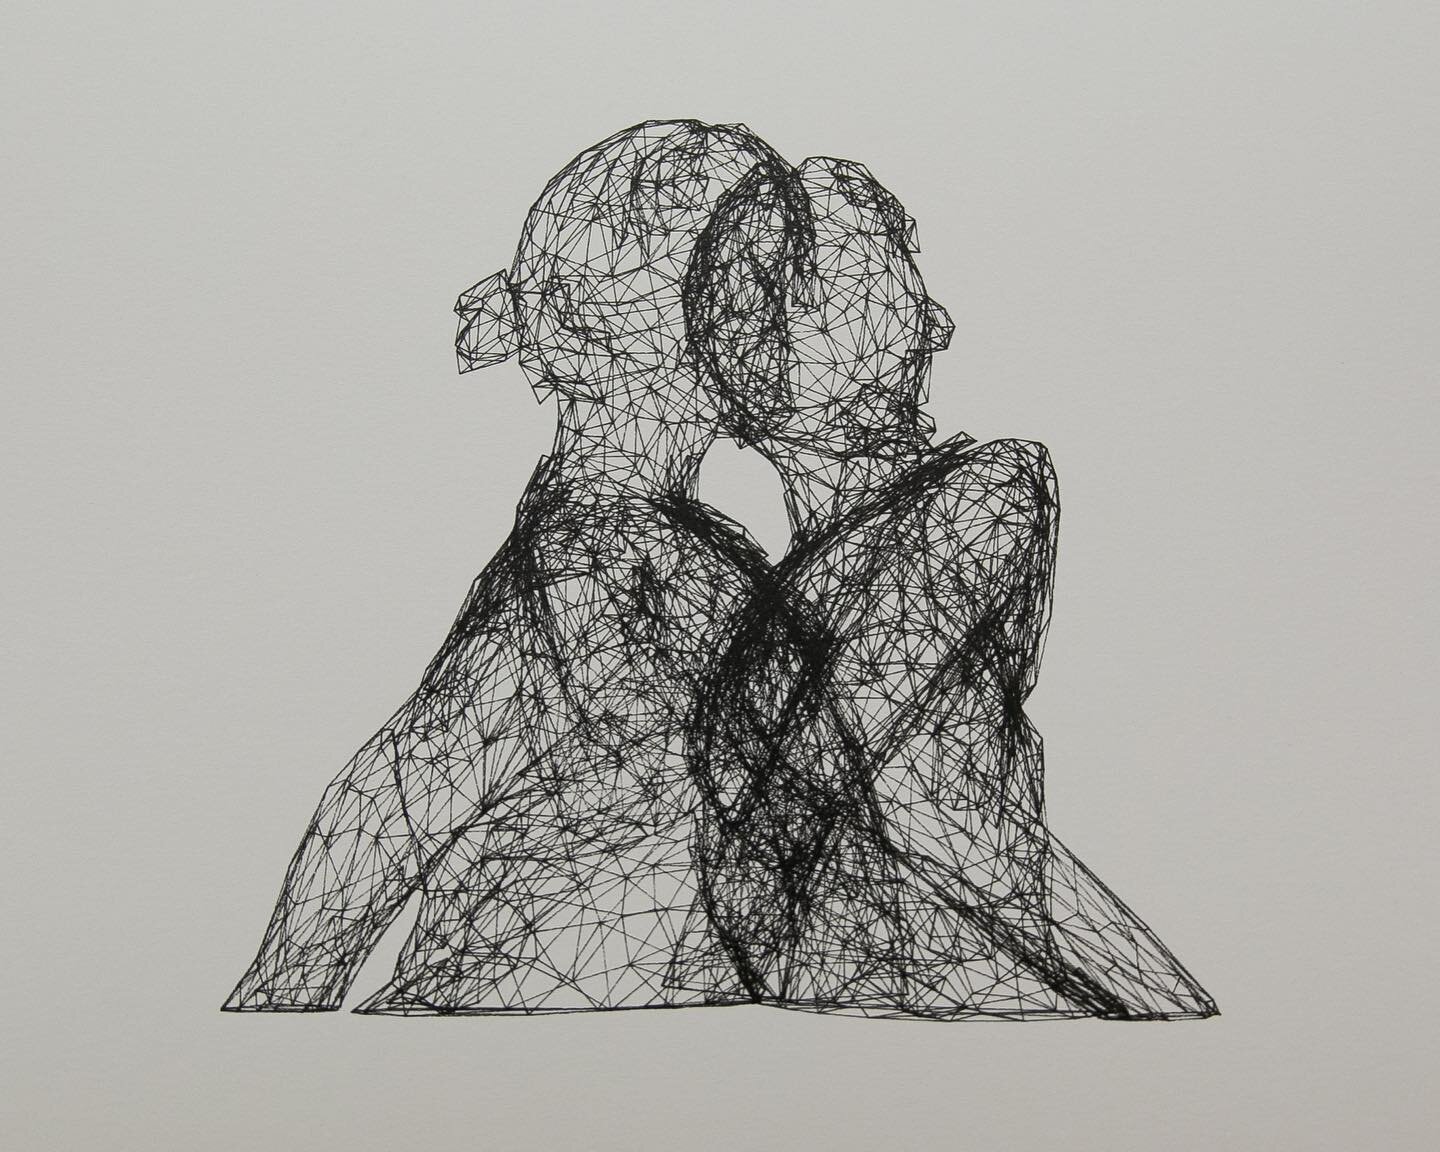 ~ pen plot drawing sale ~ available now! link in bio 🤠

Meshing with myself #3 &amp; #4
Dimensions vary: 4.75 x 6.75&quot; - 19 x 25&quot;
Prices vary: $20-$80

These drawings were made by manipulating the mesh of a 3D scan of my body. Even though t